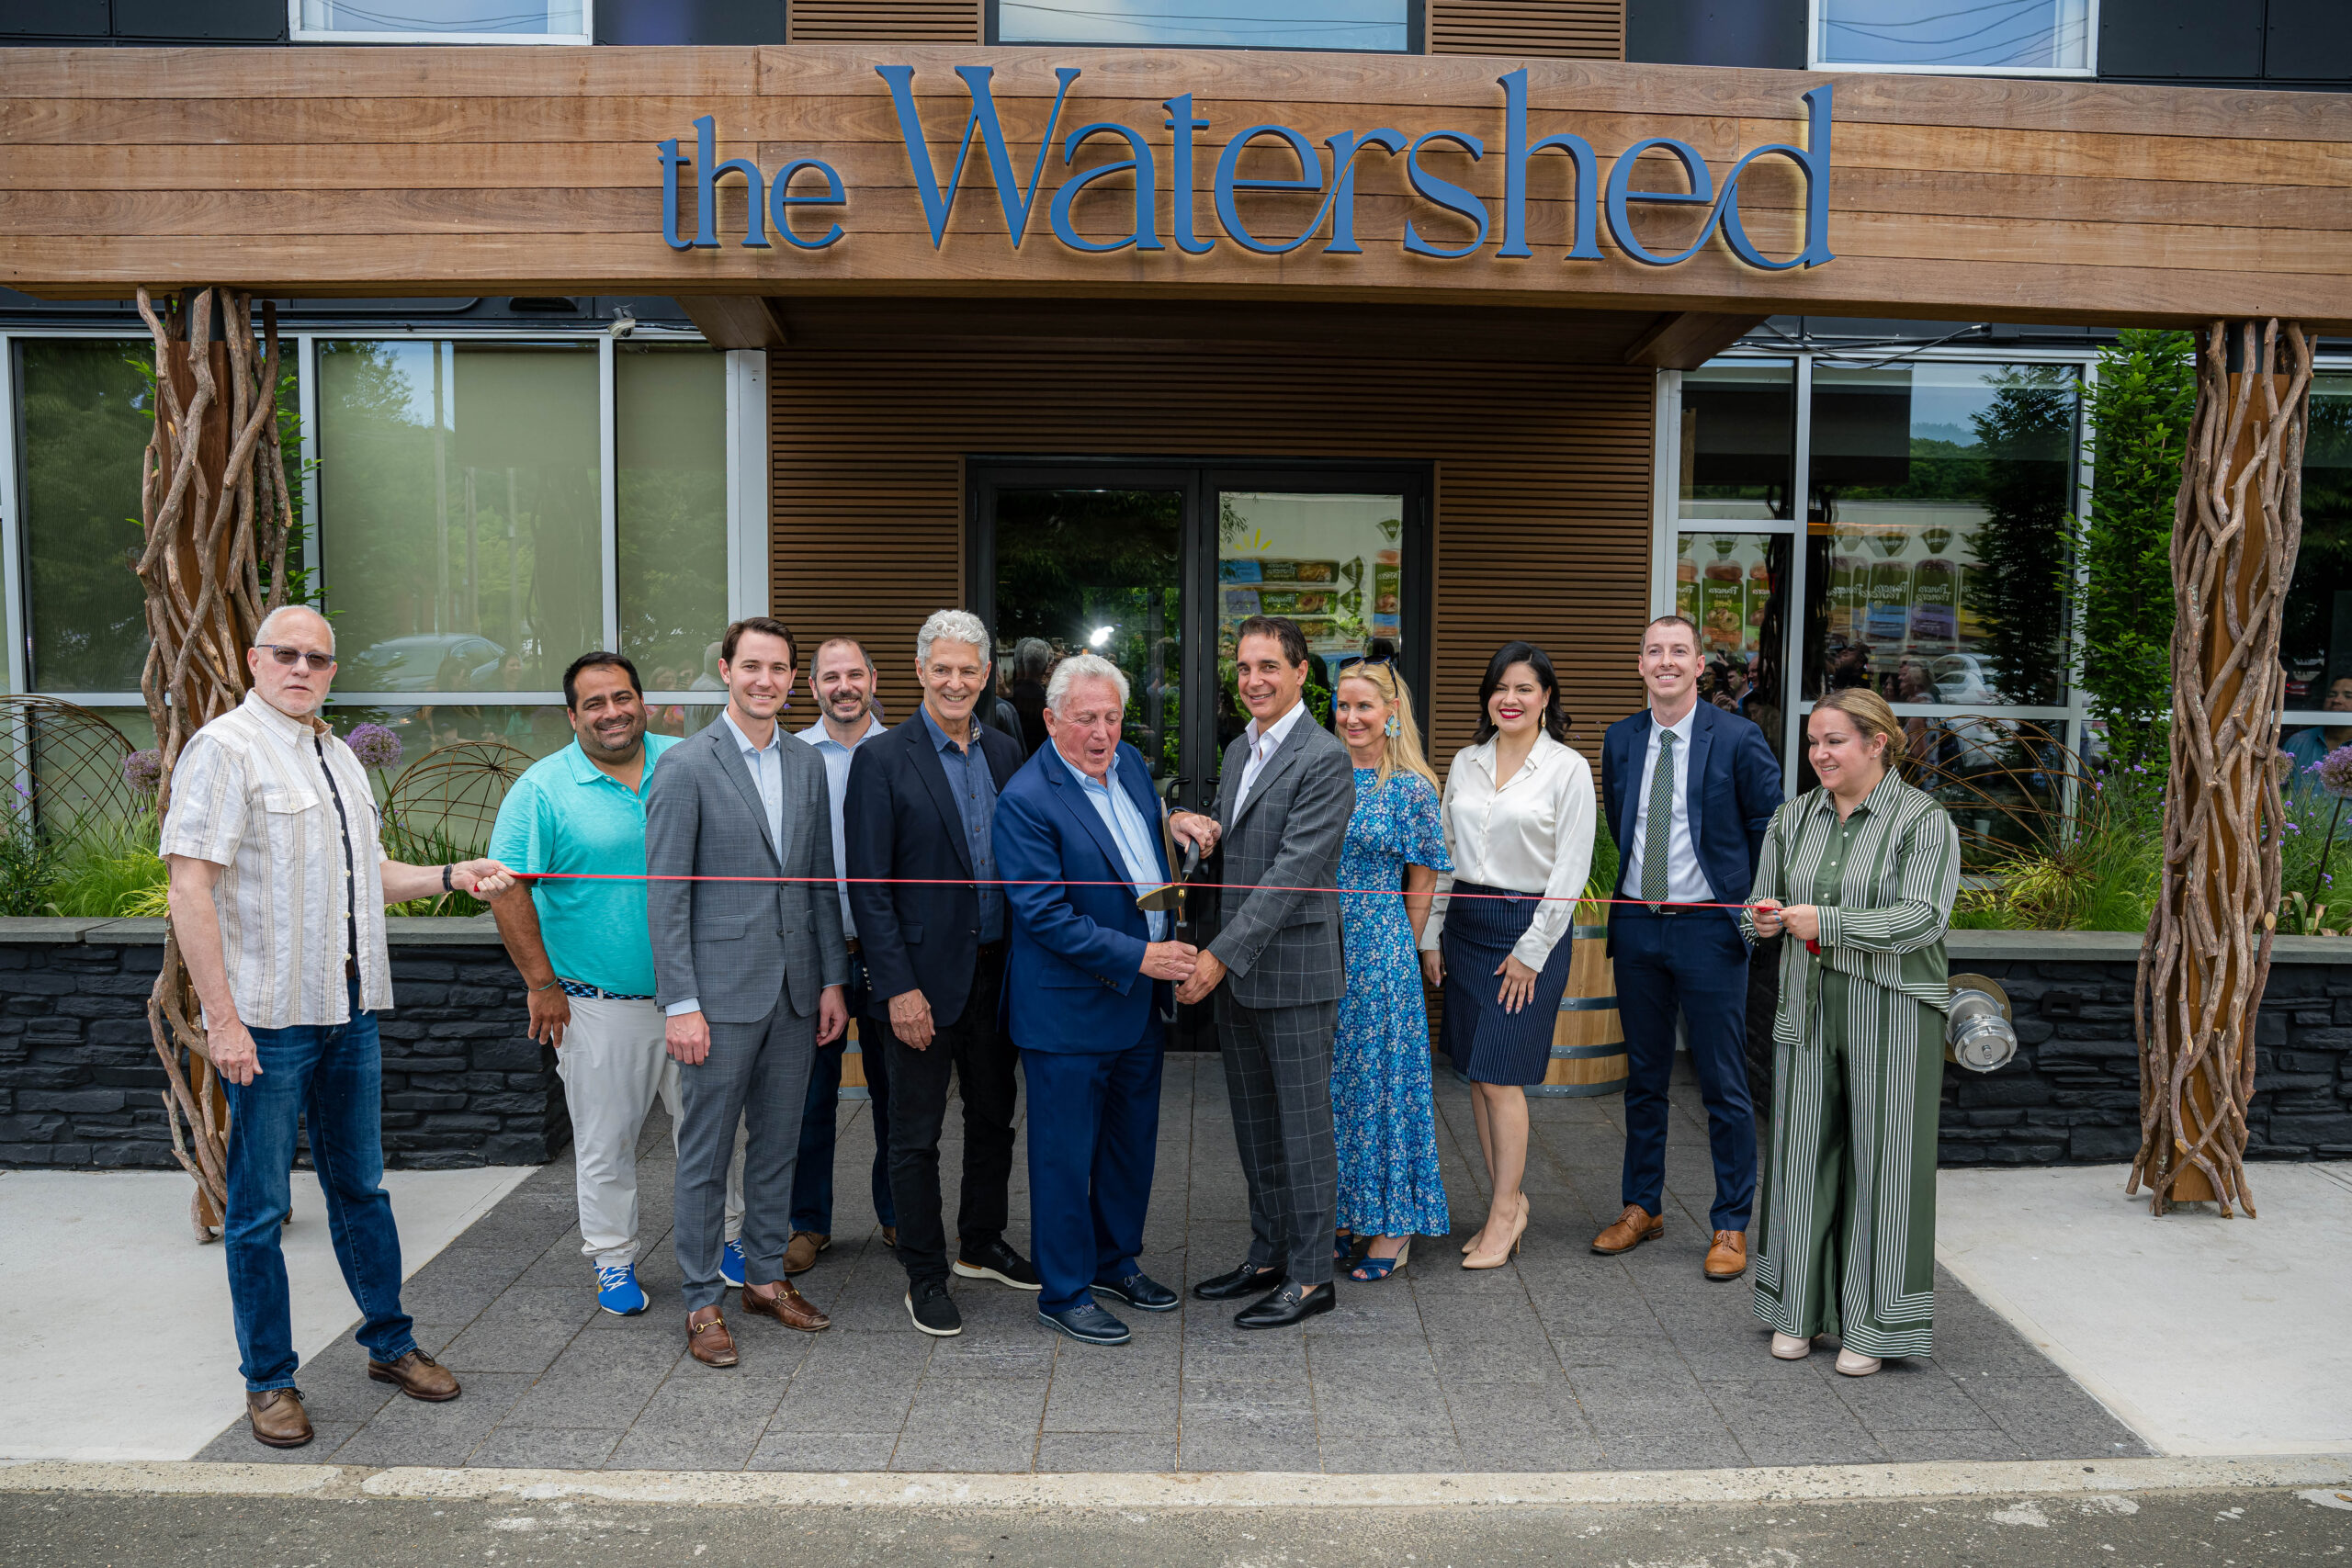 Latest Watershed news is a ribbon cutting